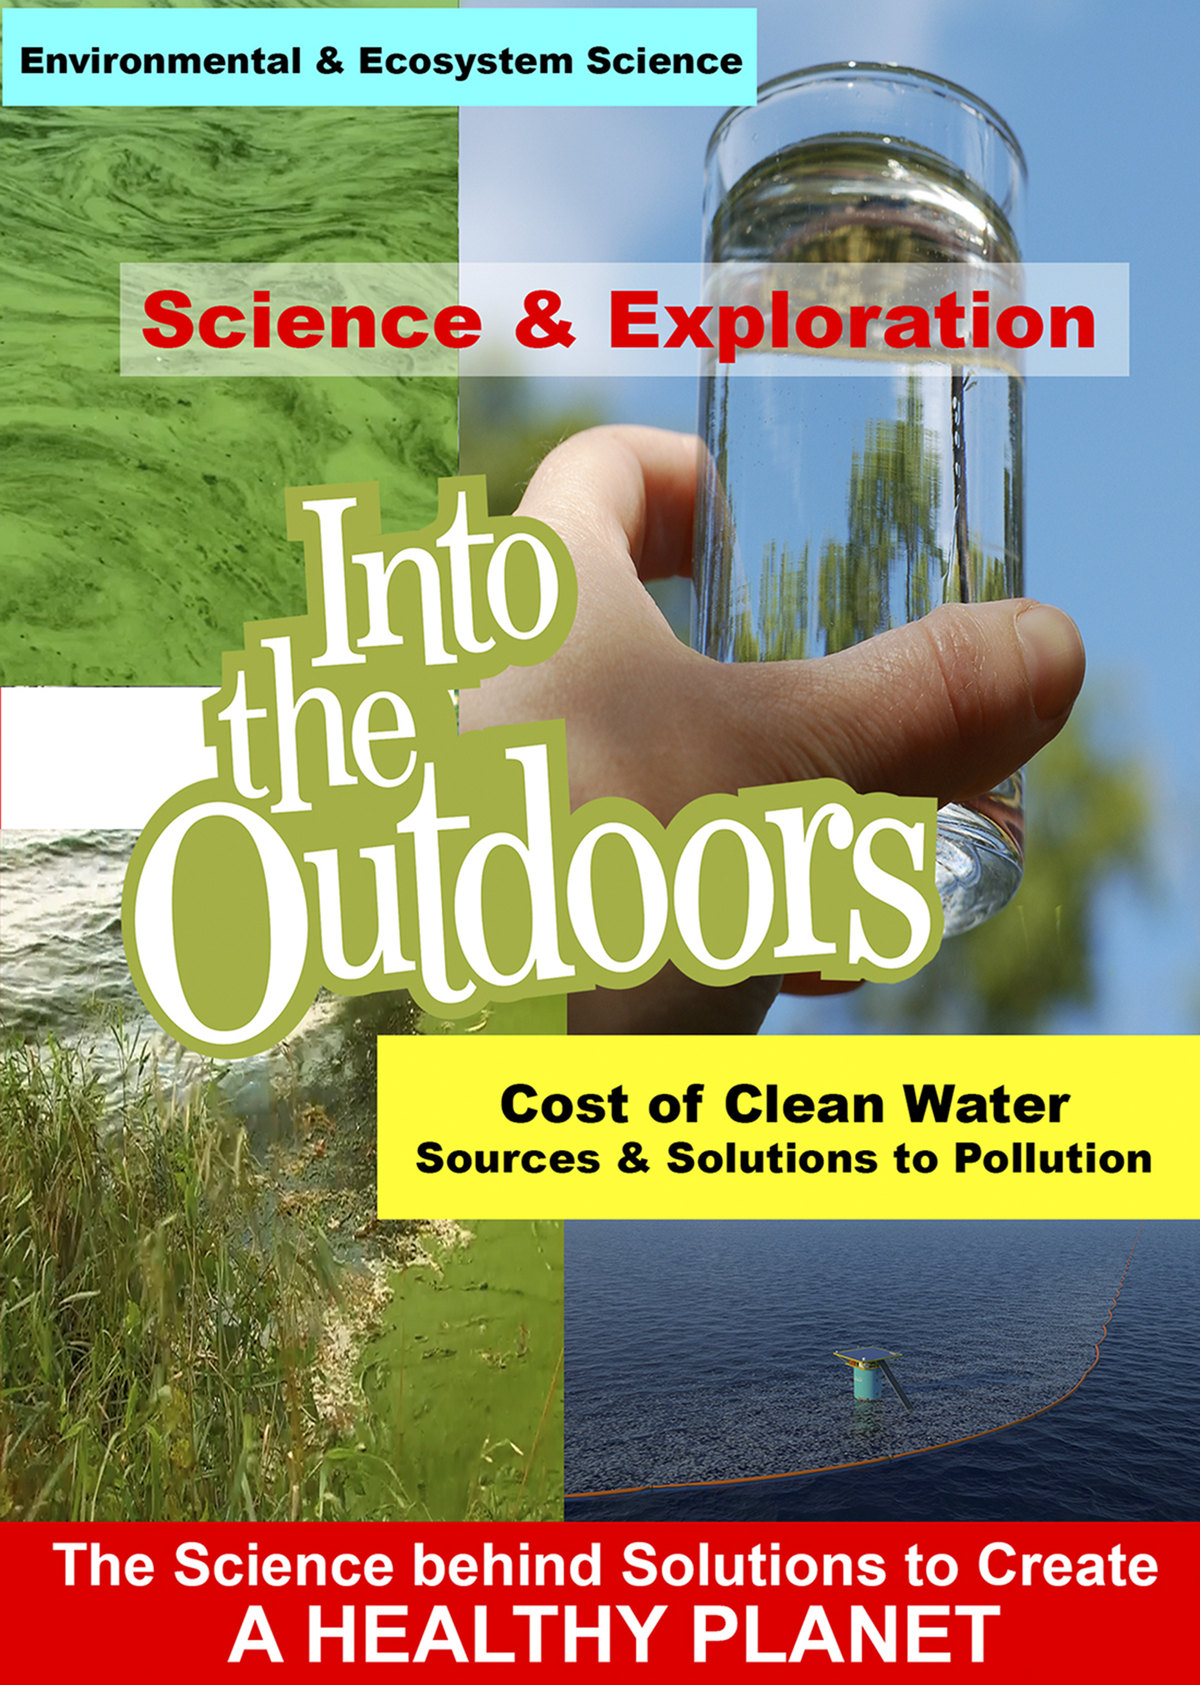 K4972 - Cost of Clean Water - Sources & Solutions to Pollution